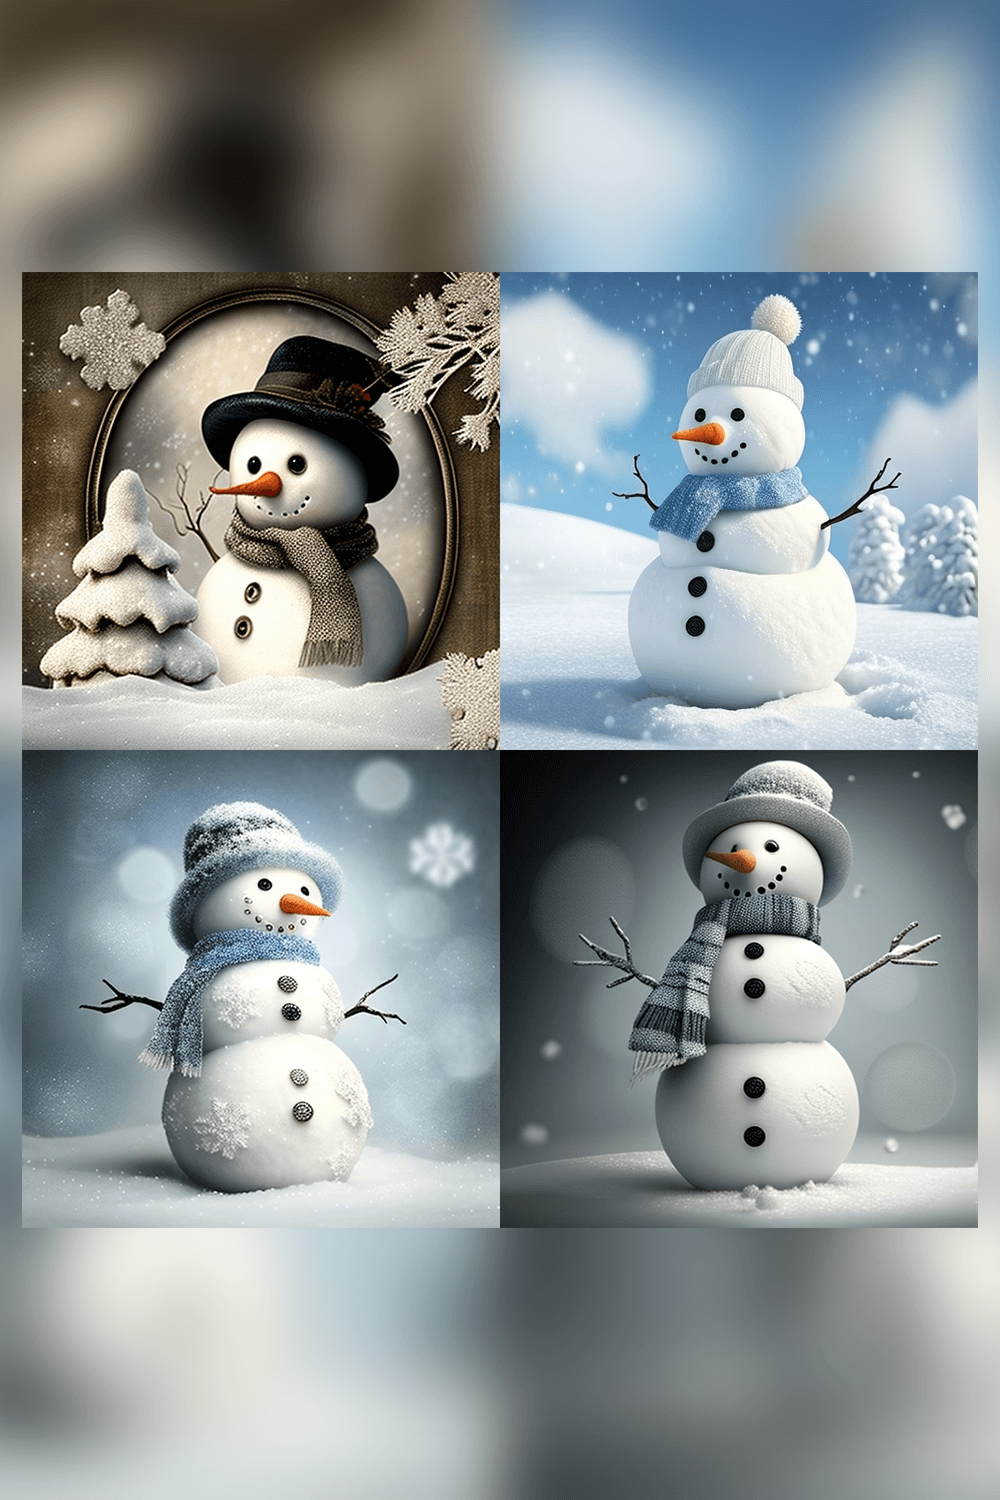 Series of photoshopped images of a snowman.